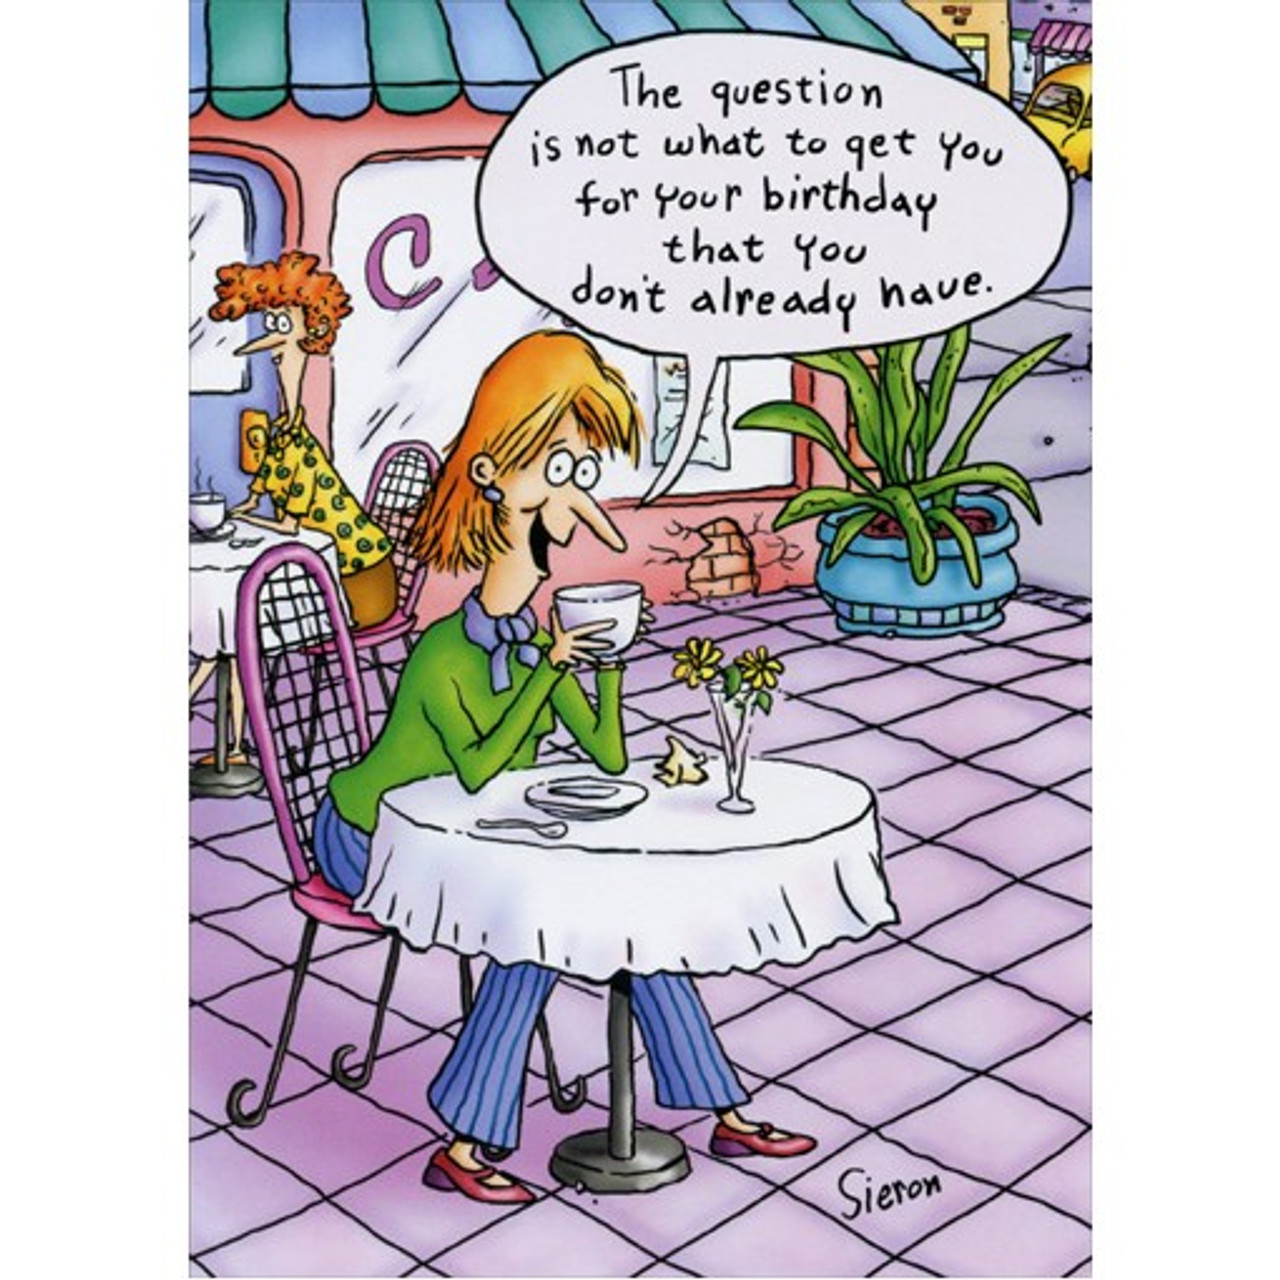 Woman at Table Funny / Humorous Birthday Card | PaperCards.com